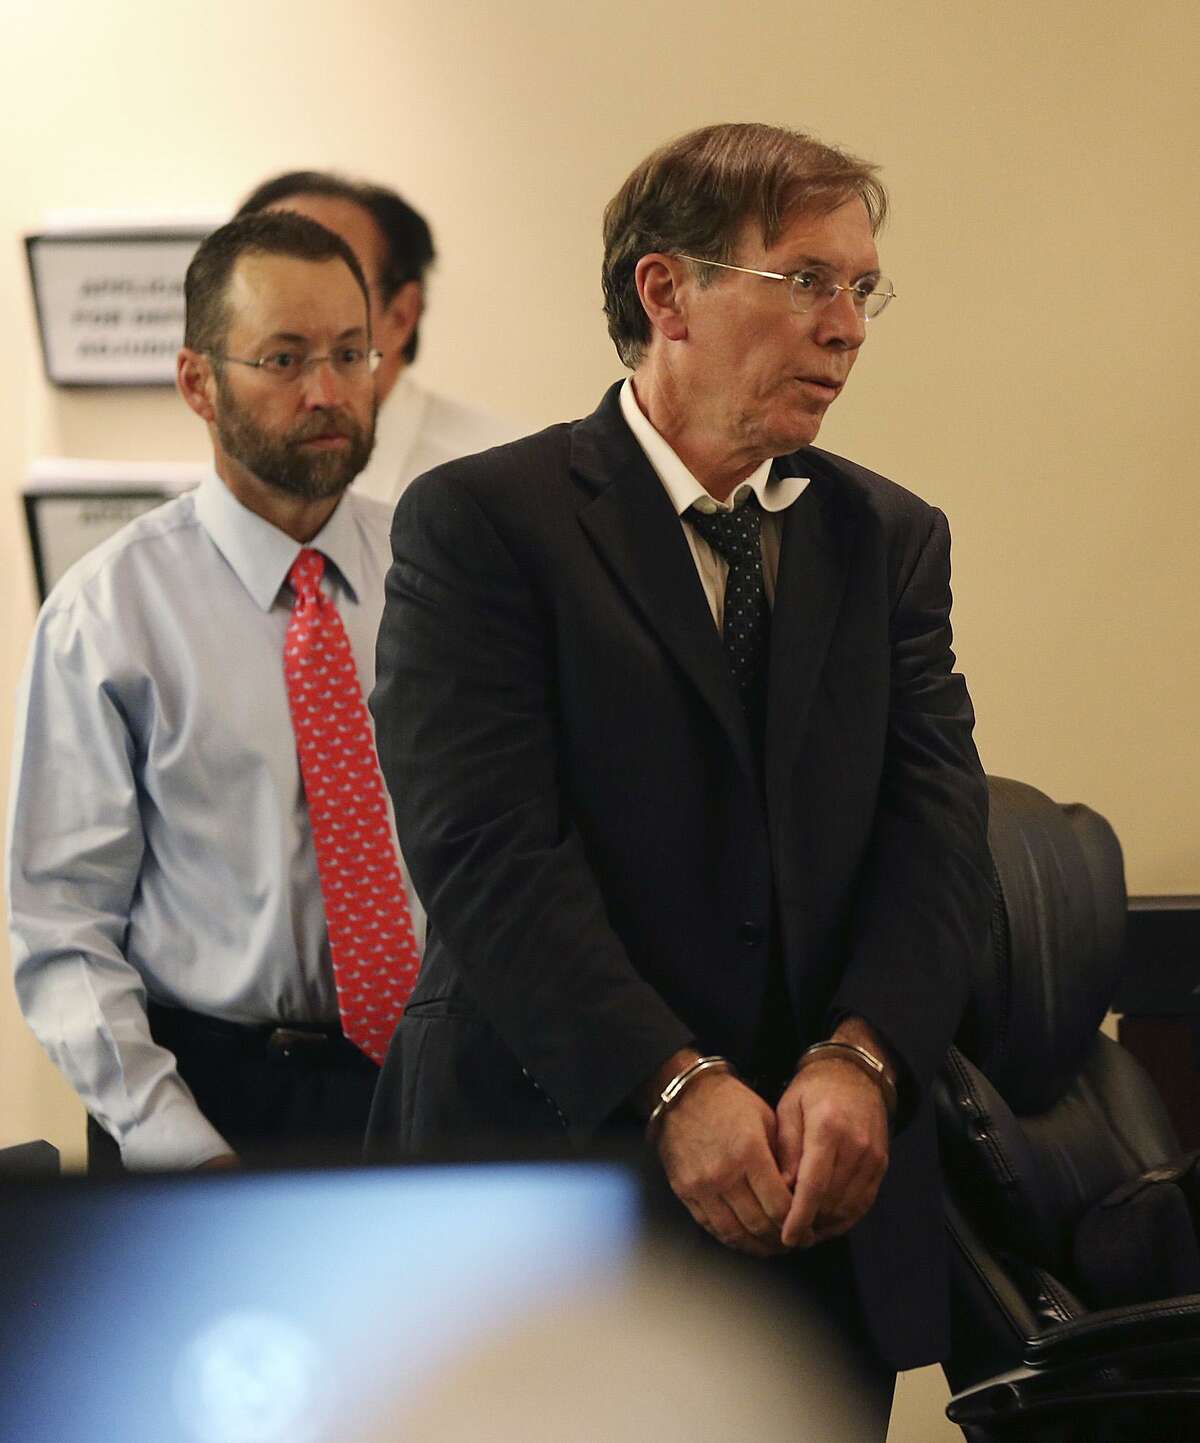 Dr. Calvin Day, right, walks back into the Bexar County 379th District Court during the punishment phase of his sexual assault trial, Monday, June 24, 2013. Day convicted of sexually assaulting a patient but later won a new trial and dismissal of the case. In back is one of his attorneys, Jay Norton.